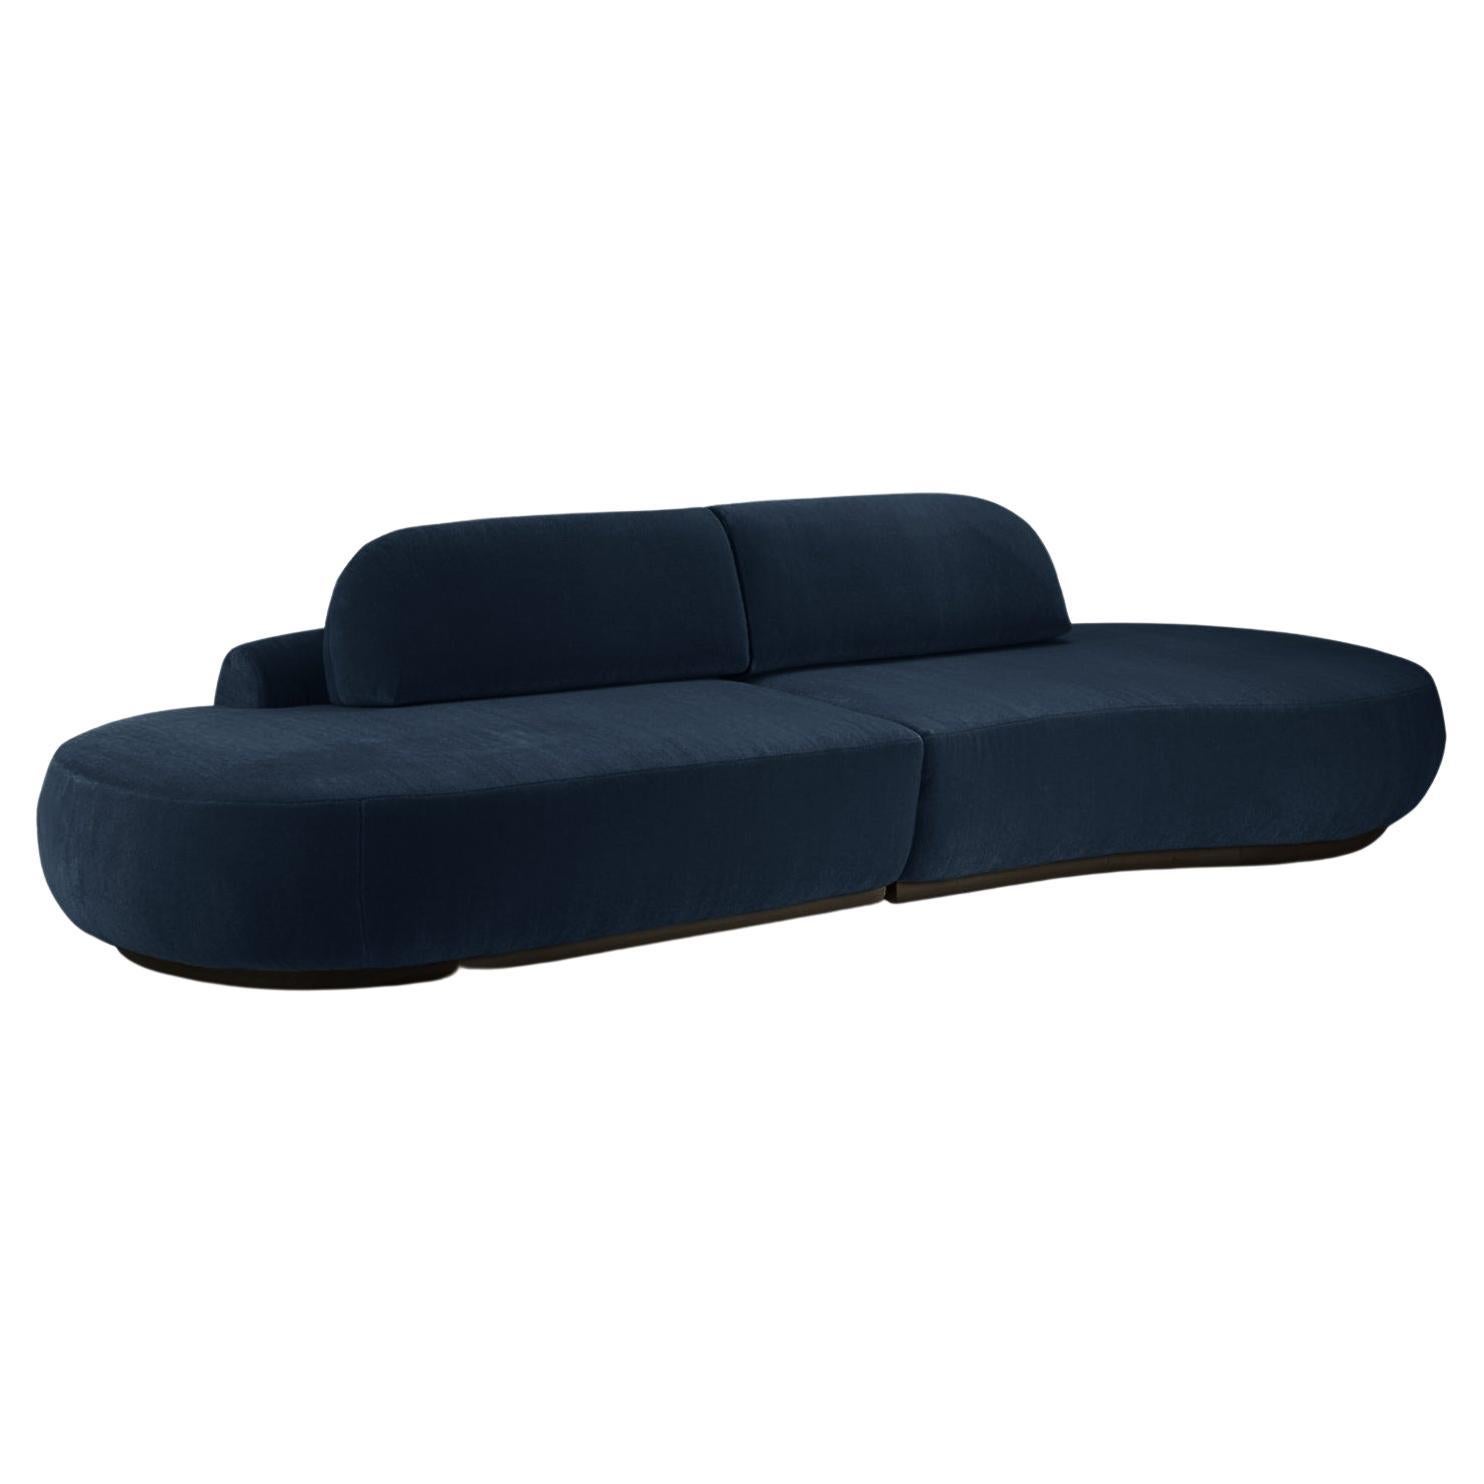 Naked Curved Sectional Sofa, 2 Piece with Beech Ash-056-5 and Paris Black For Sale